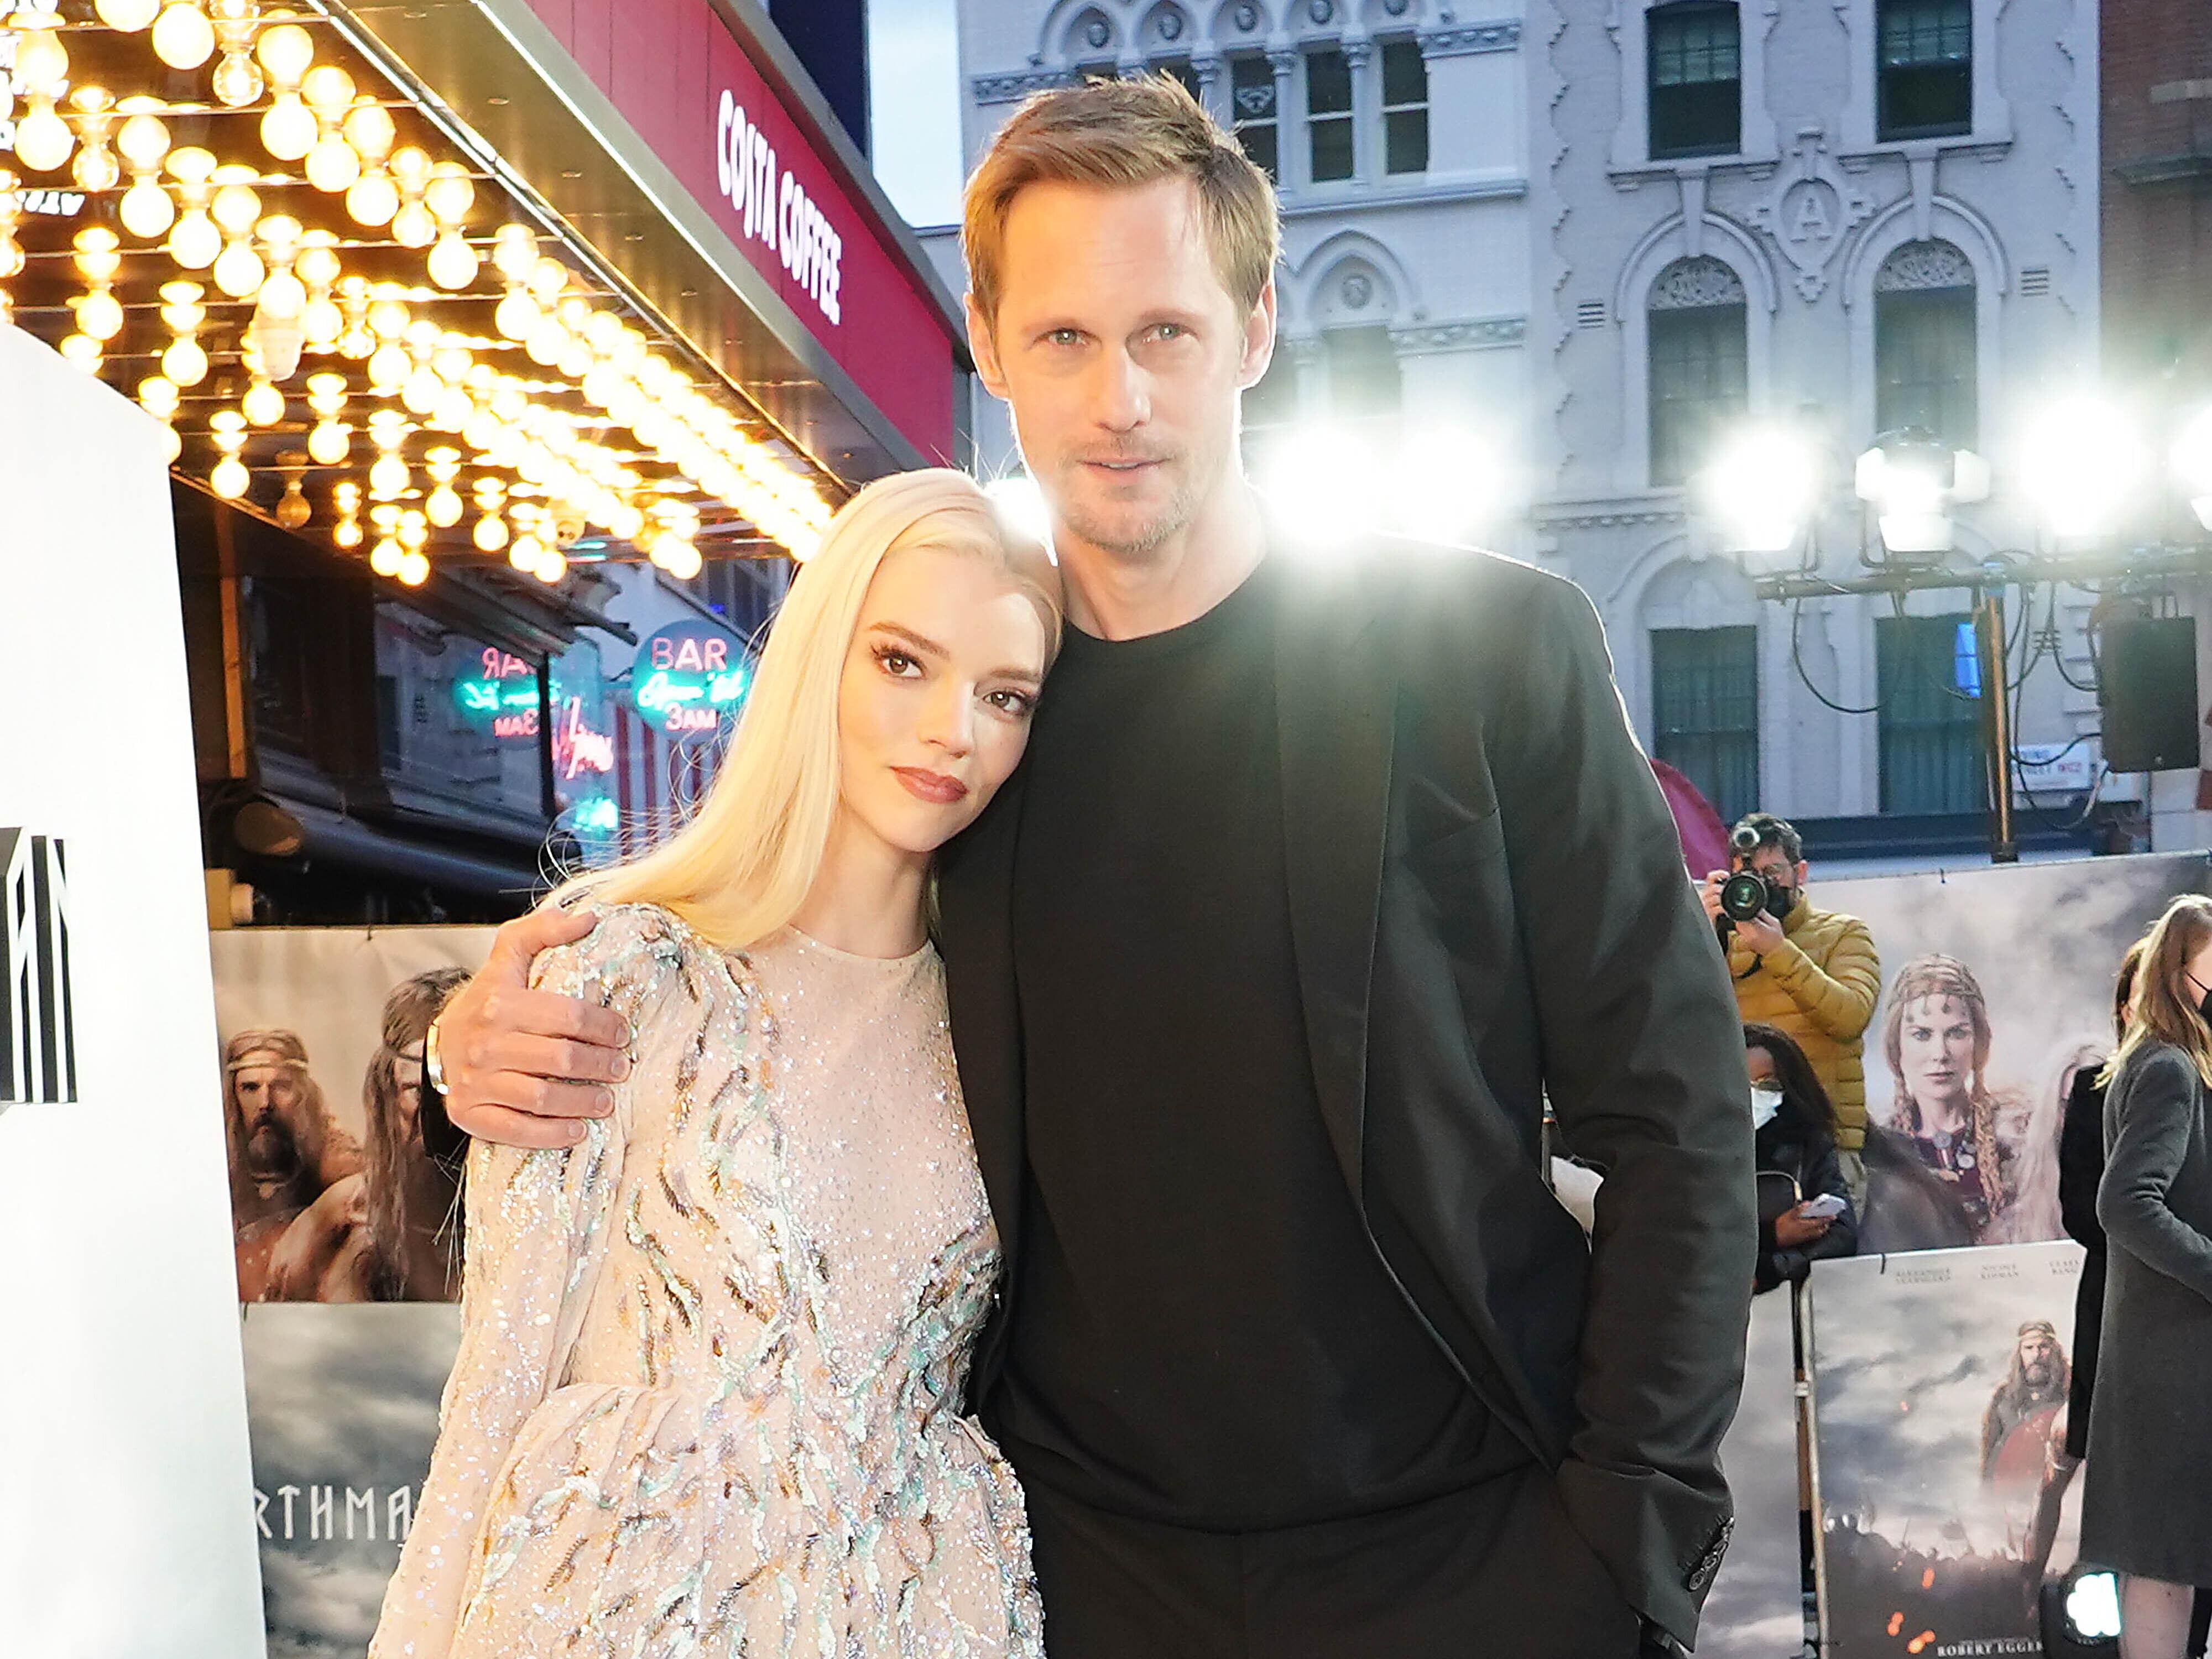 Anya Taylor-Joy on filming her first intimate scenes with Alexander Skarsgard